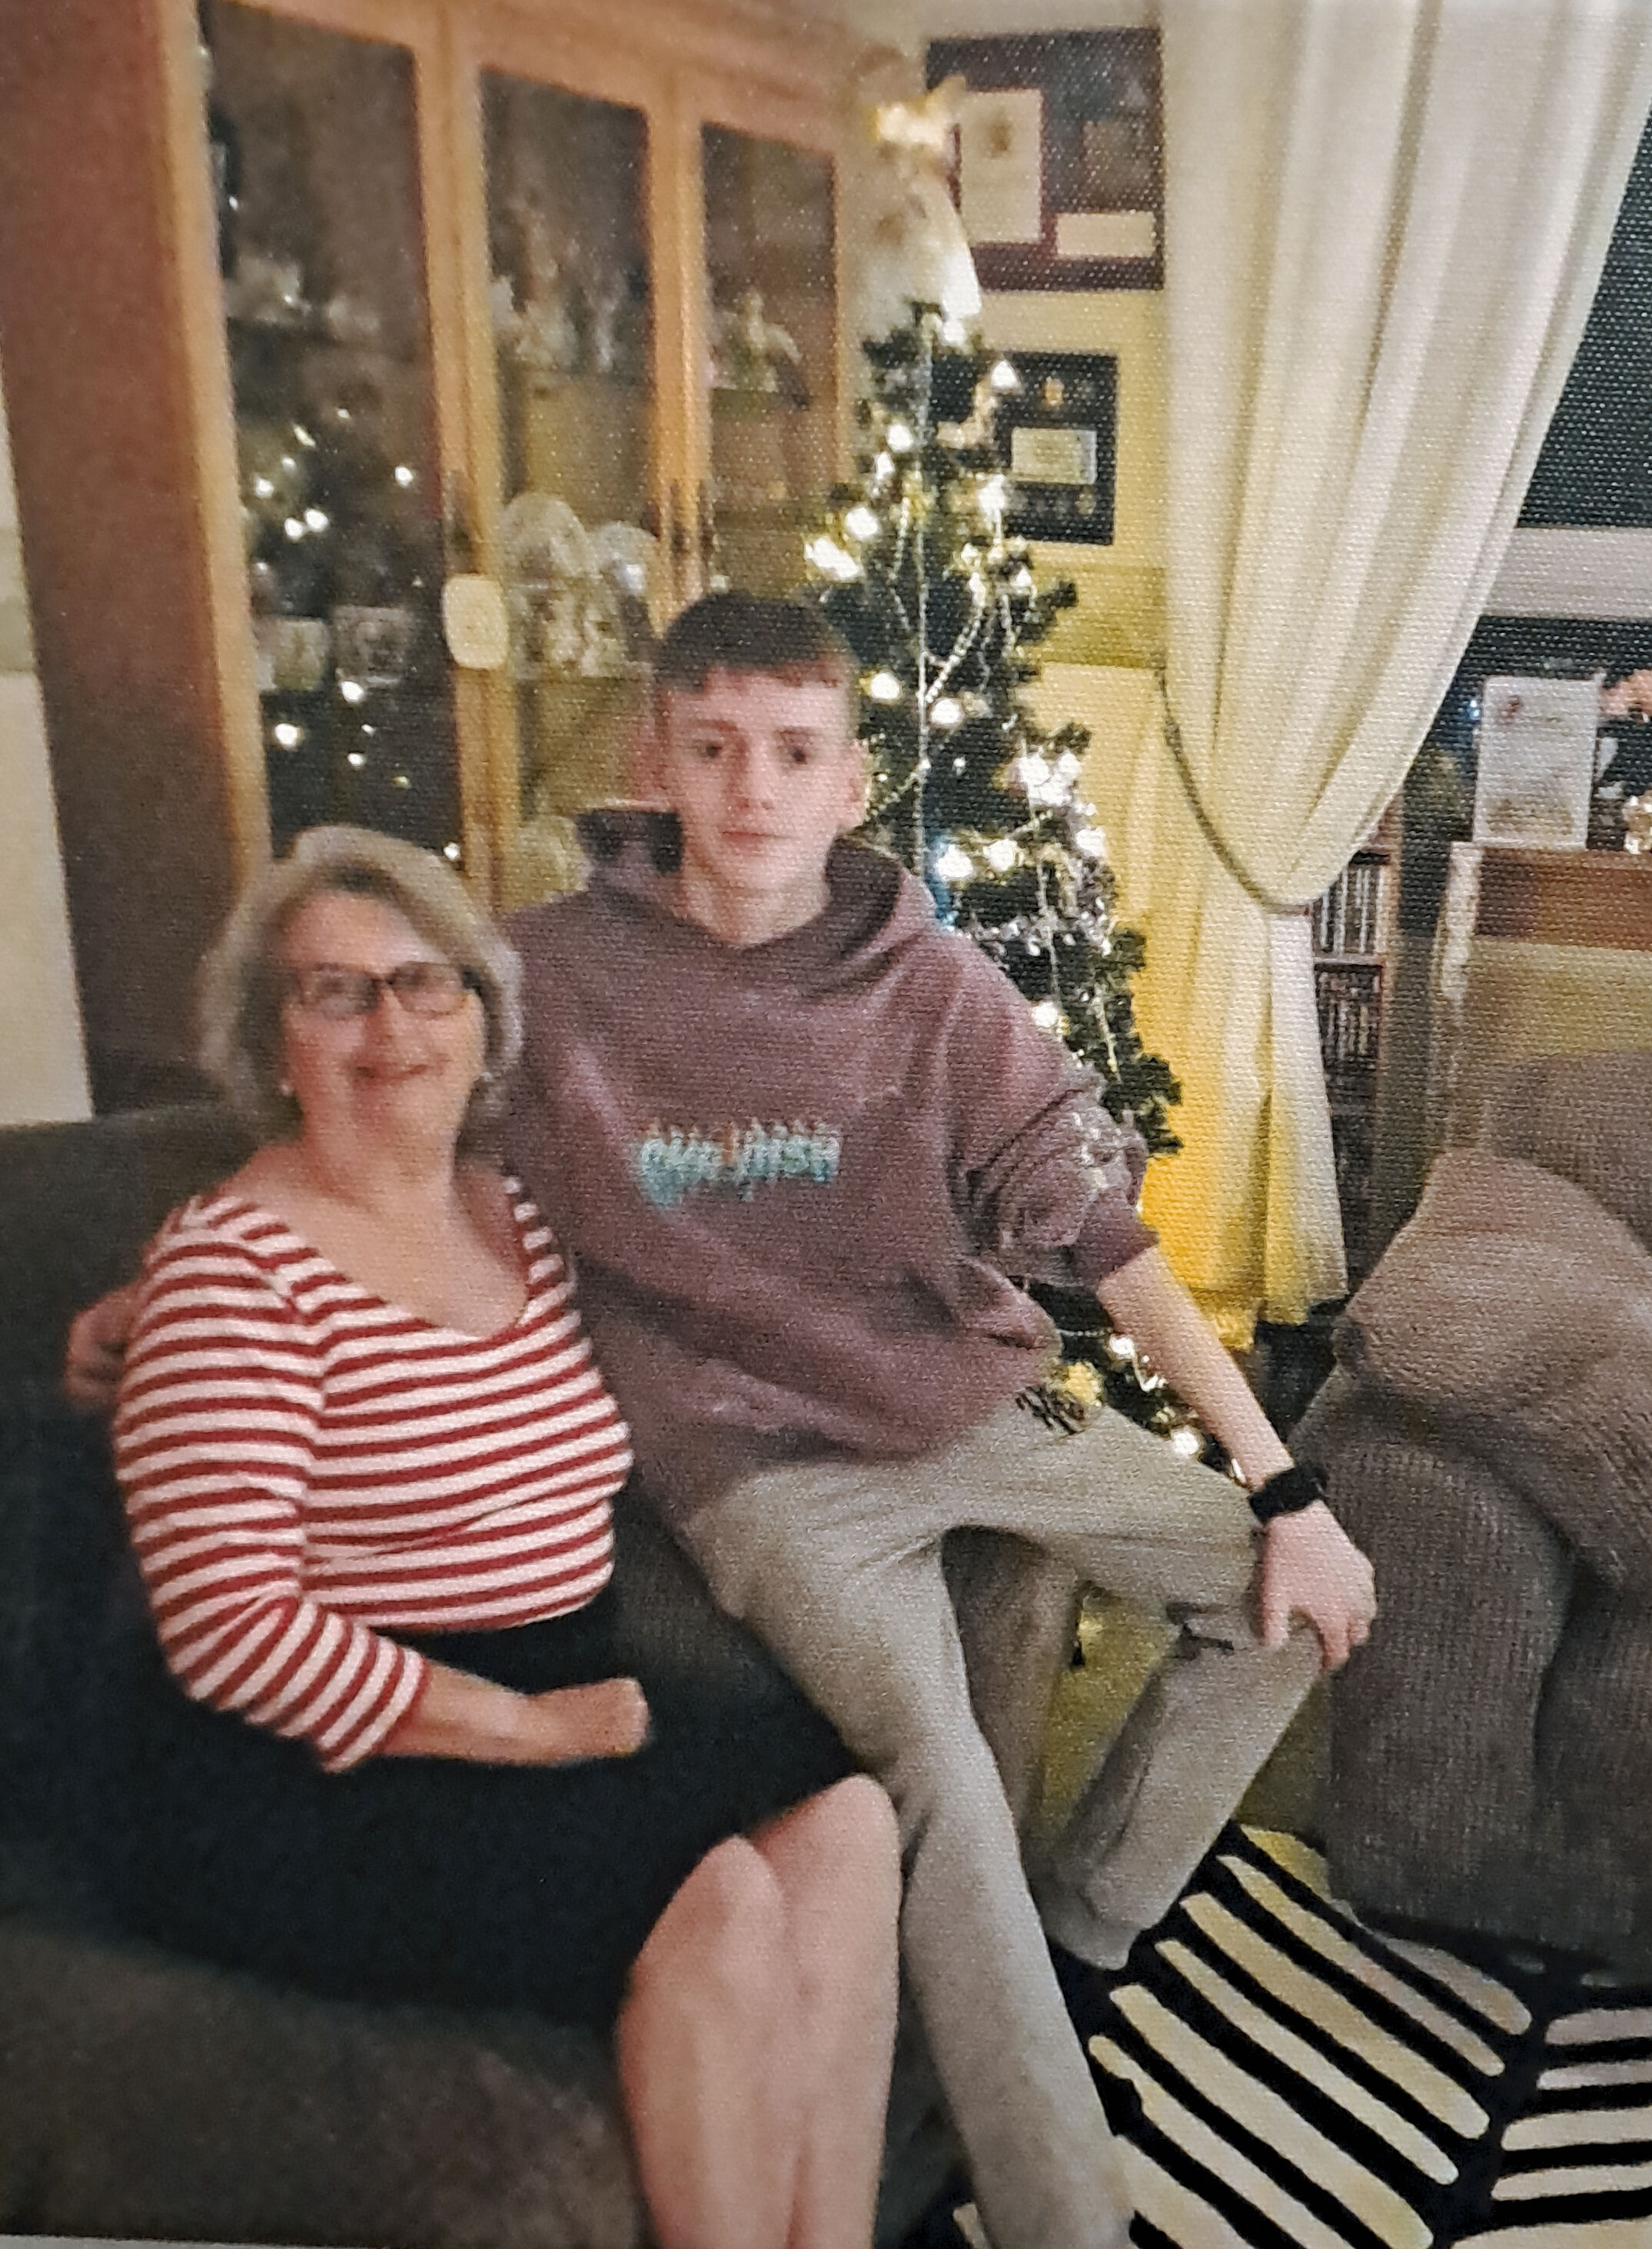 Marks first Christmas staying with Nana & Granda. 25th. December 2019.